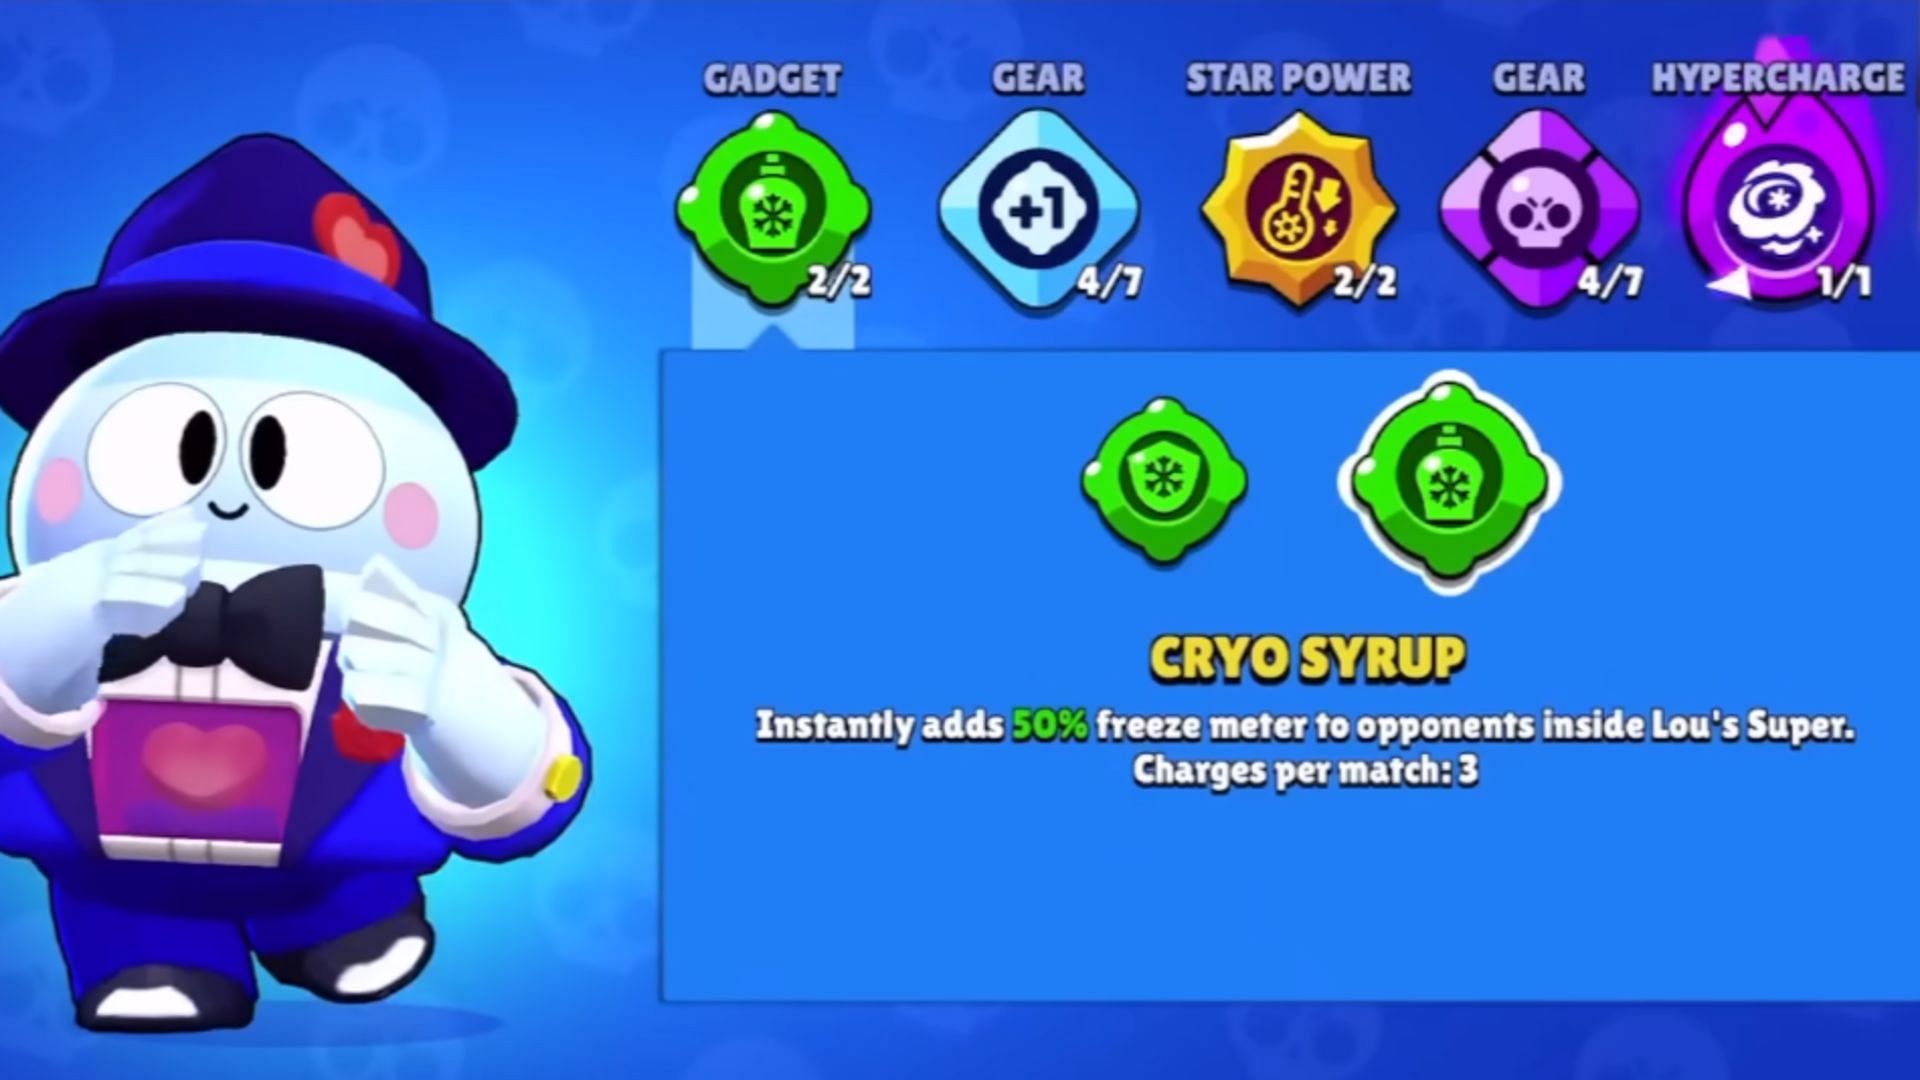 Cryo Syrup Gadget (Image via Supercell)